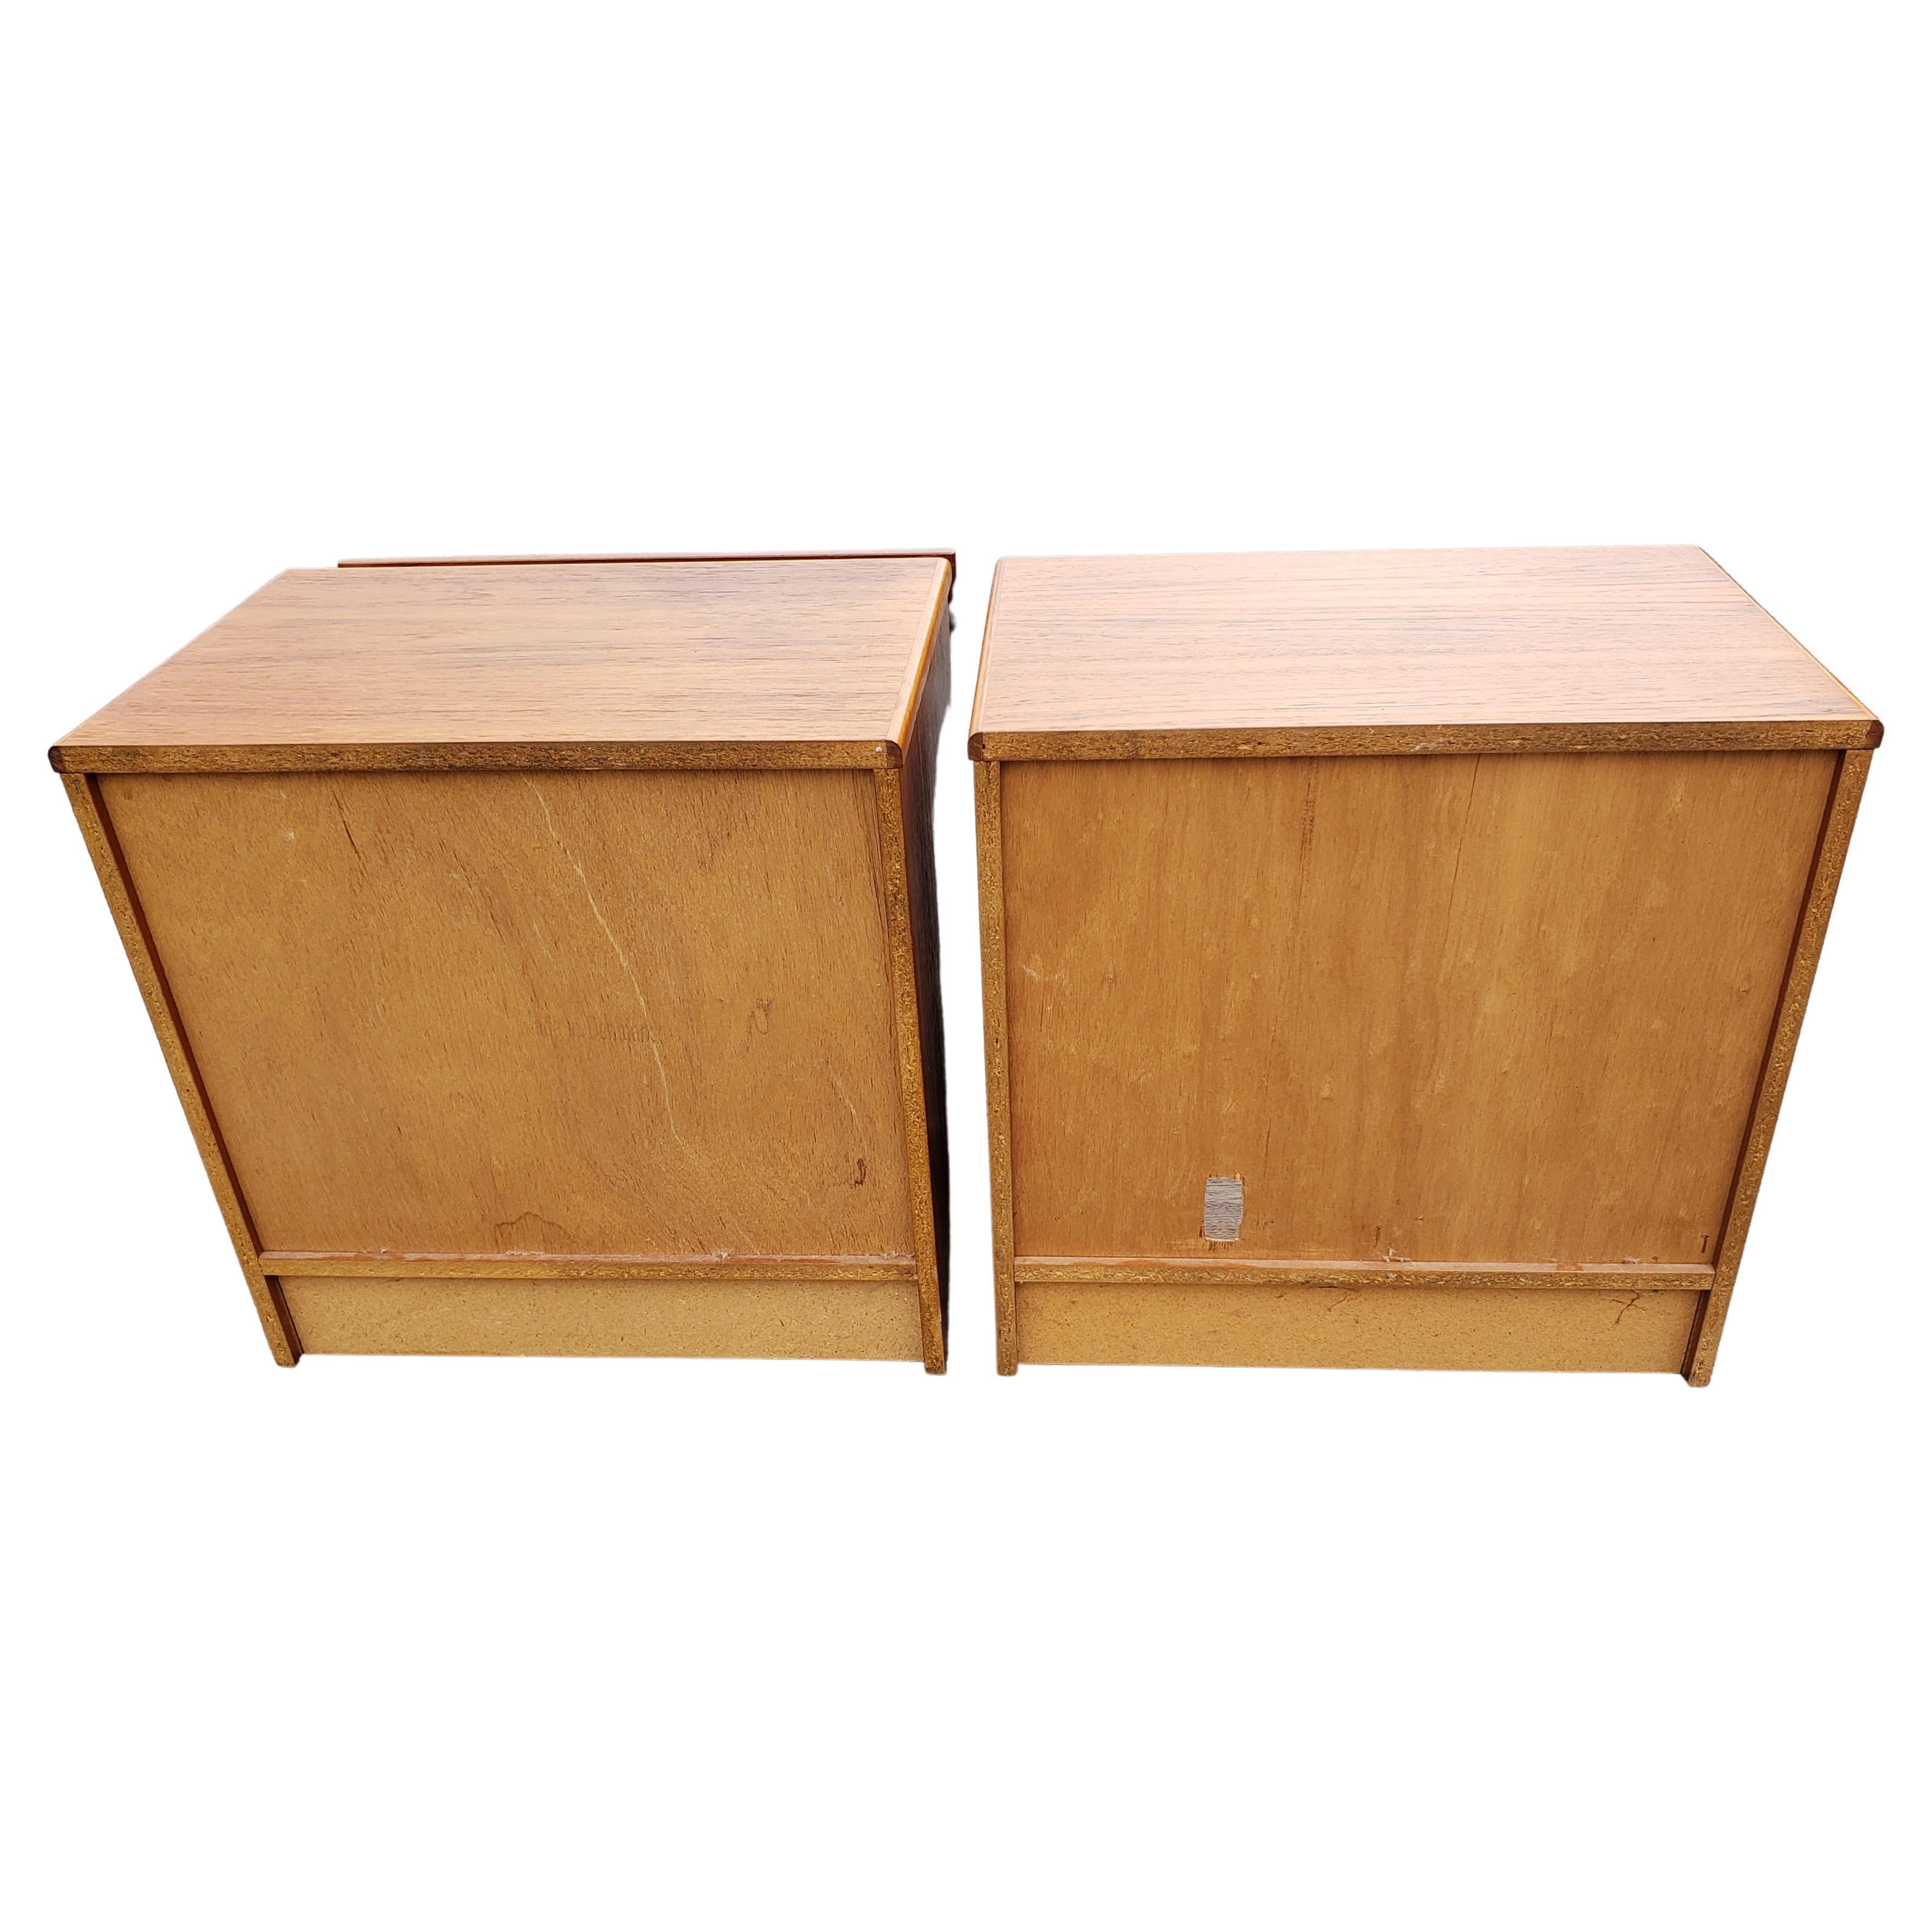 Danish Modern Teak Finish One Drawer Nightstands, a Pair, Circa 1970s In Good Condition For Sale In Germantown, MD